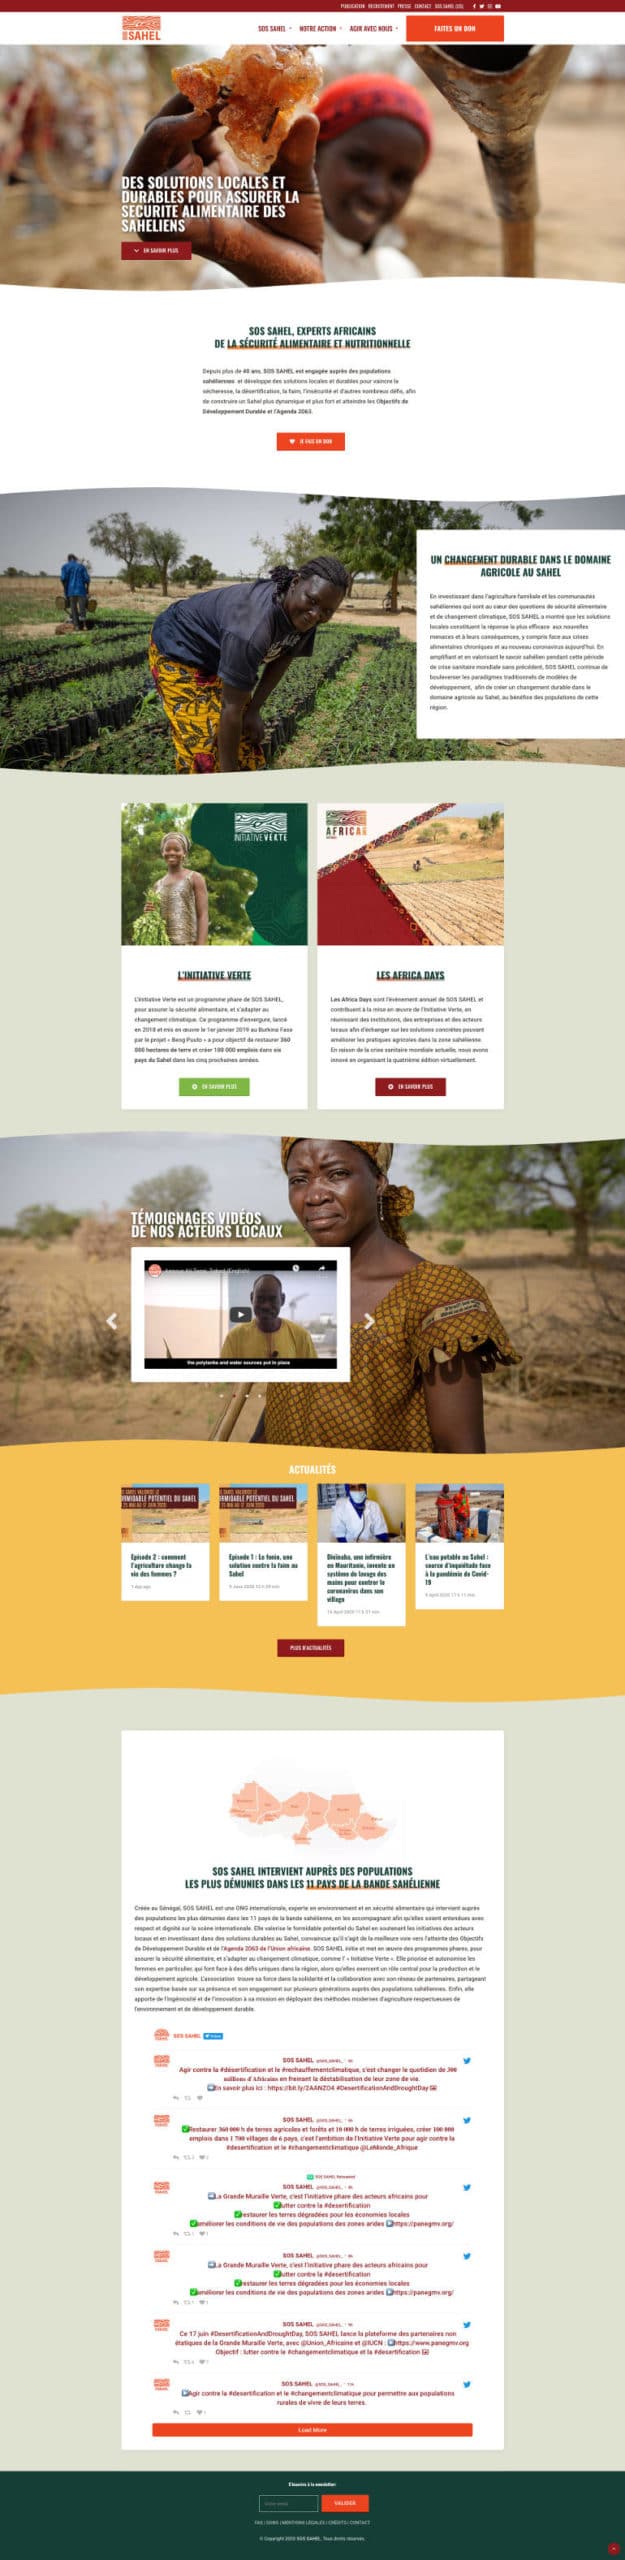 We helped SOS Sahel with many wordpress website projects: wordpress website design, UX improvements, UI improvements, complete WordPress revamps, wordpress maintenance, custom code updates. Good agency specializes in nonprofit website design and nonprofit digital marketing, online fundraising and growth marketing. Request a quote